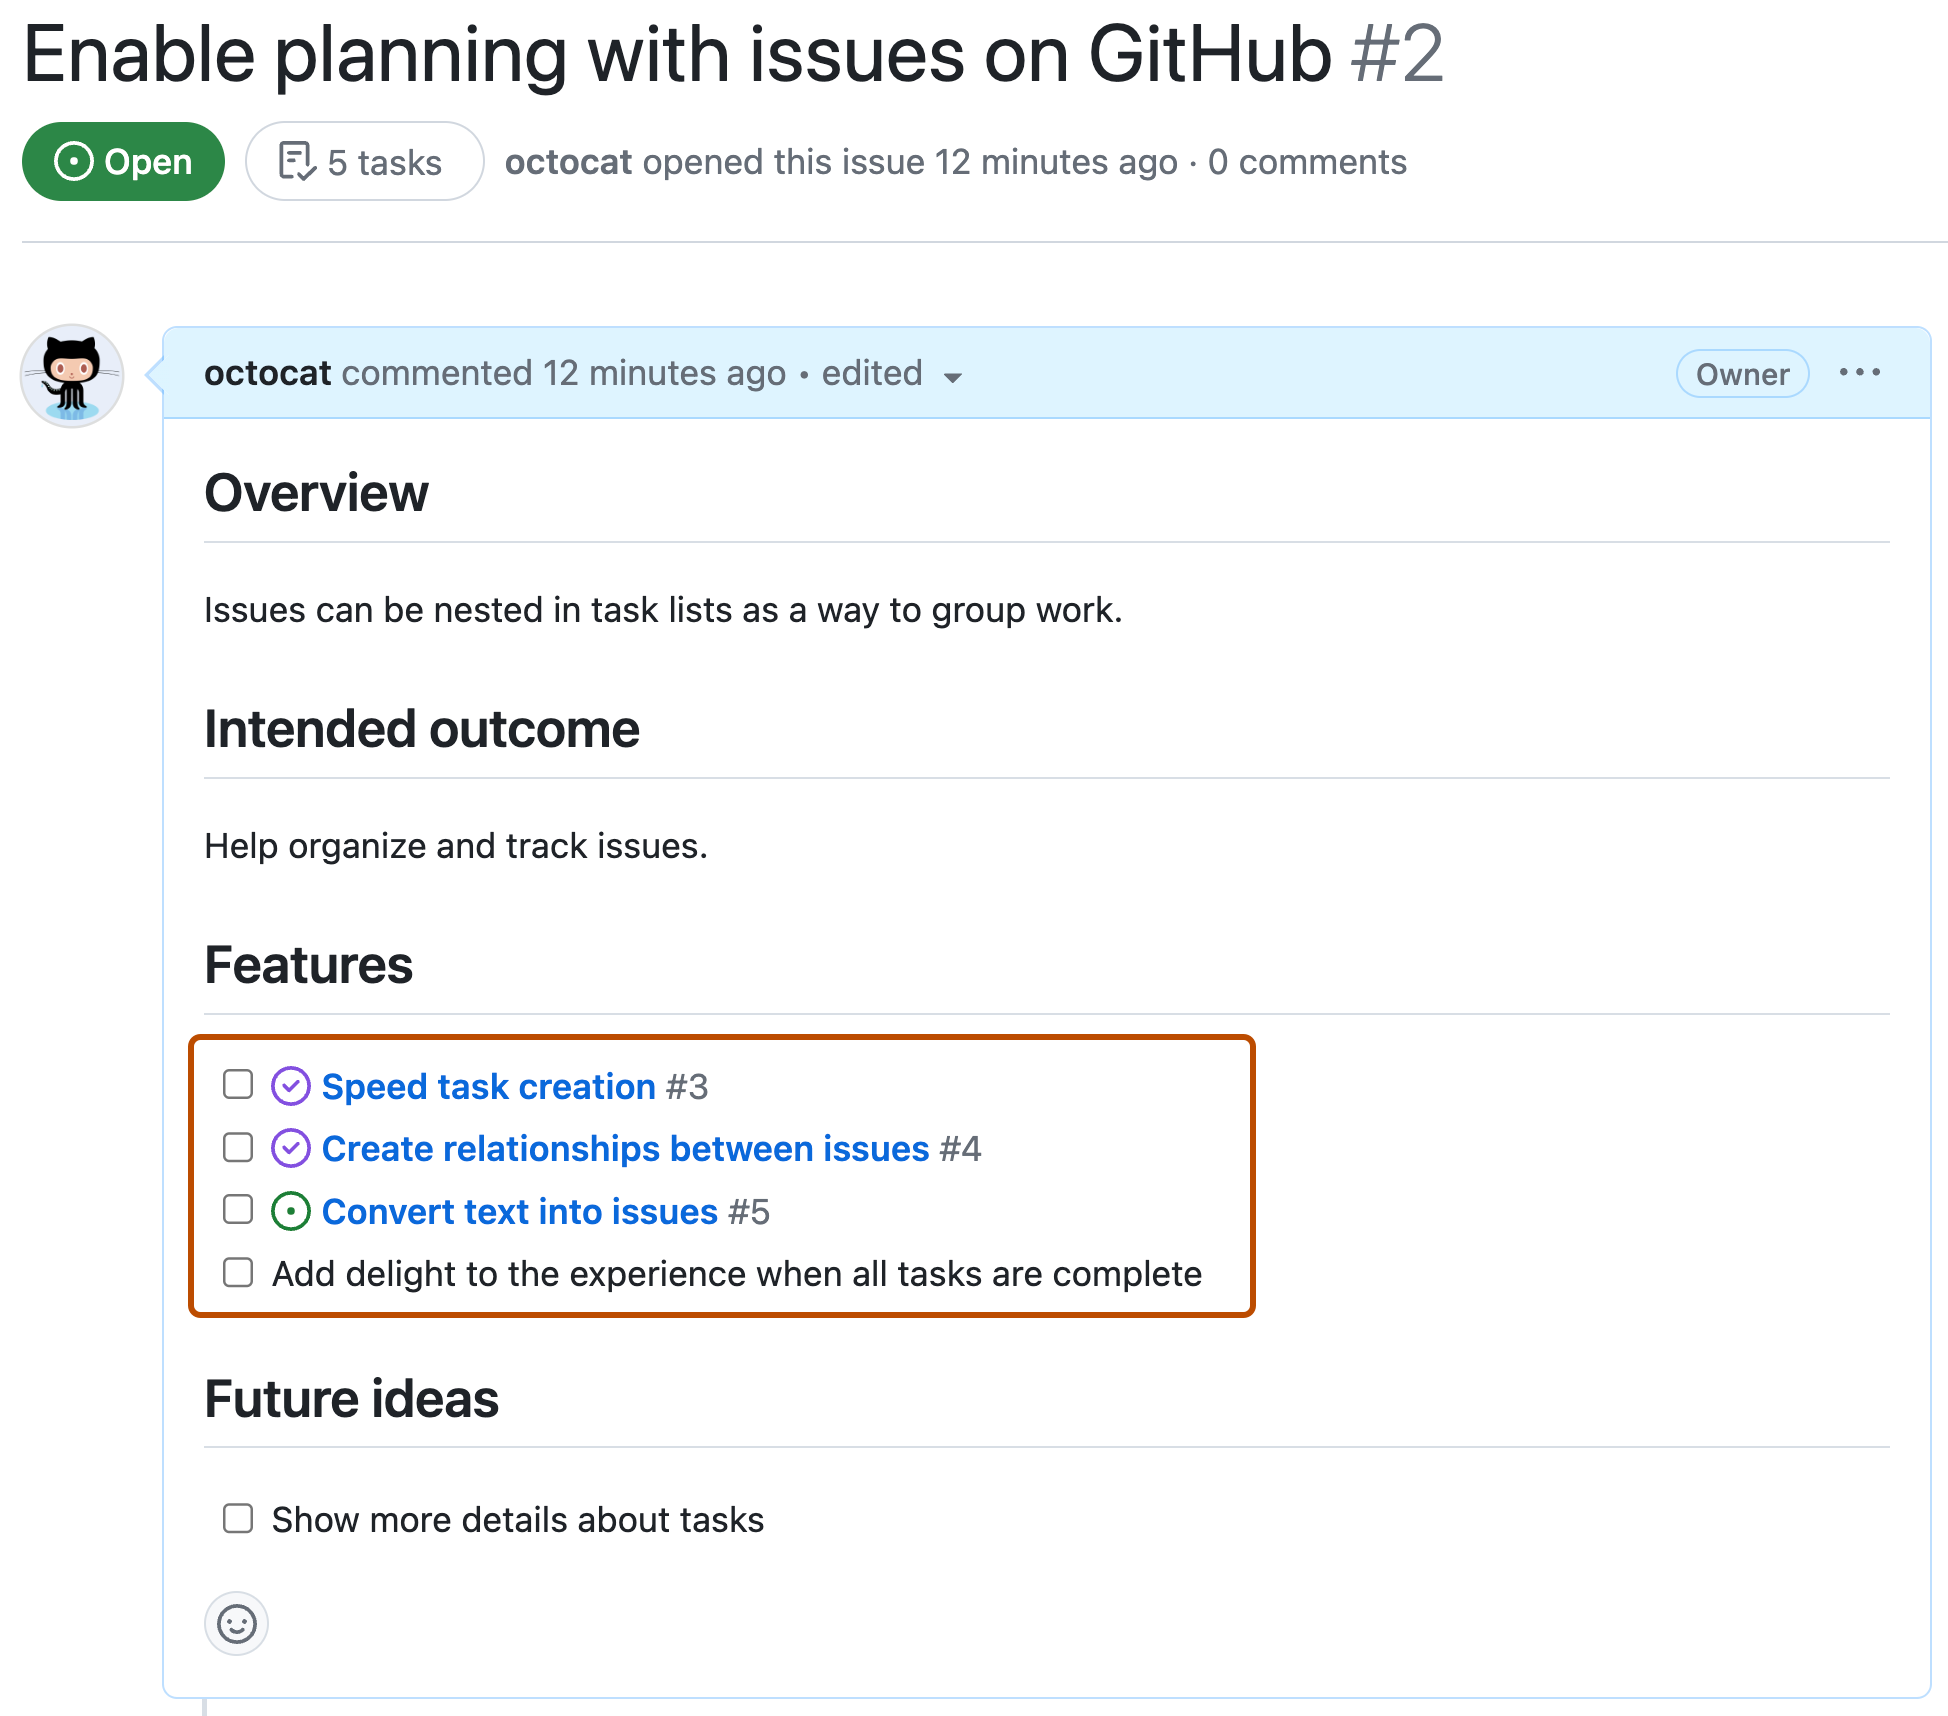 Screenshot of a GitHub issue showing a task list under the header "Features." Some items are checked as done, others unchecked as undone. Three list items link to other GitHub Issues.